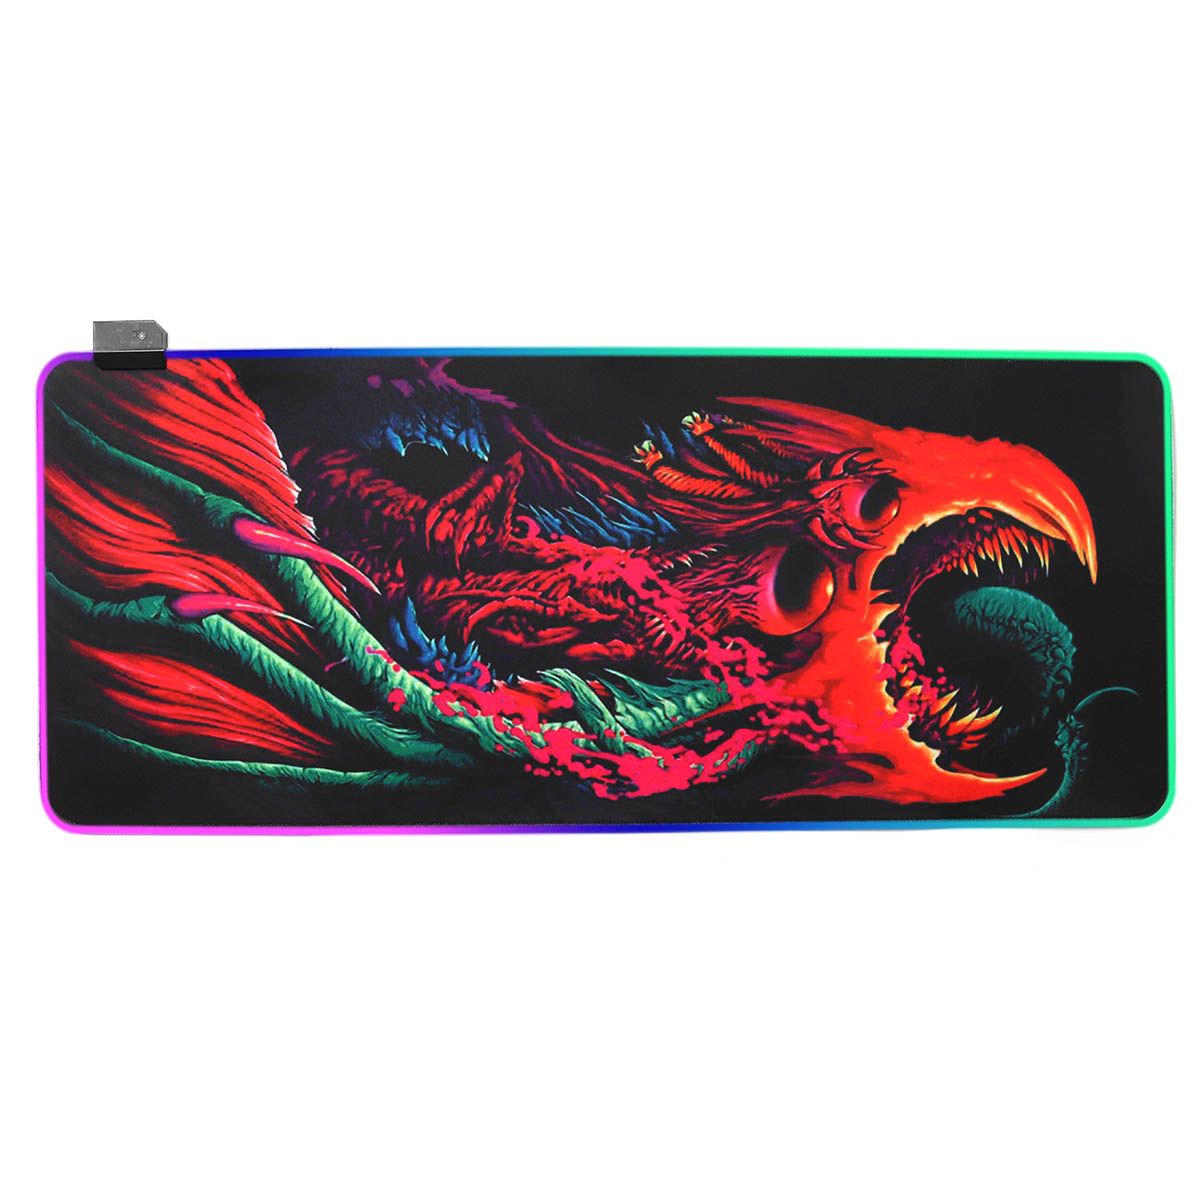 RGB-Mouse-Pad-Beast-Gaming-Keyboard-Pad-Non-slip-Rubber-Desktop-Table-Protective-Mat-for-Home-Office-1760612